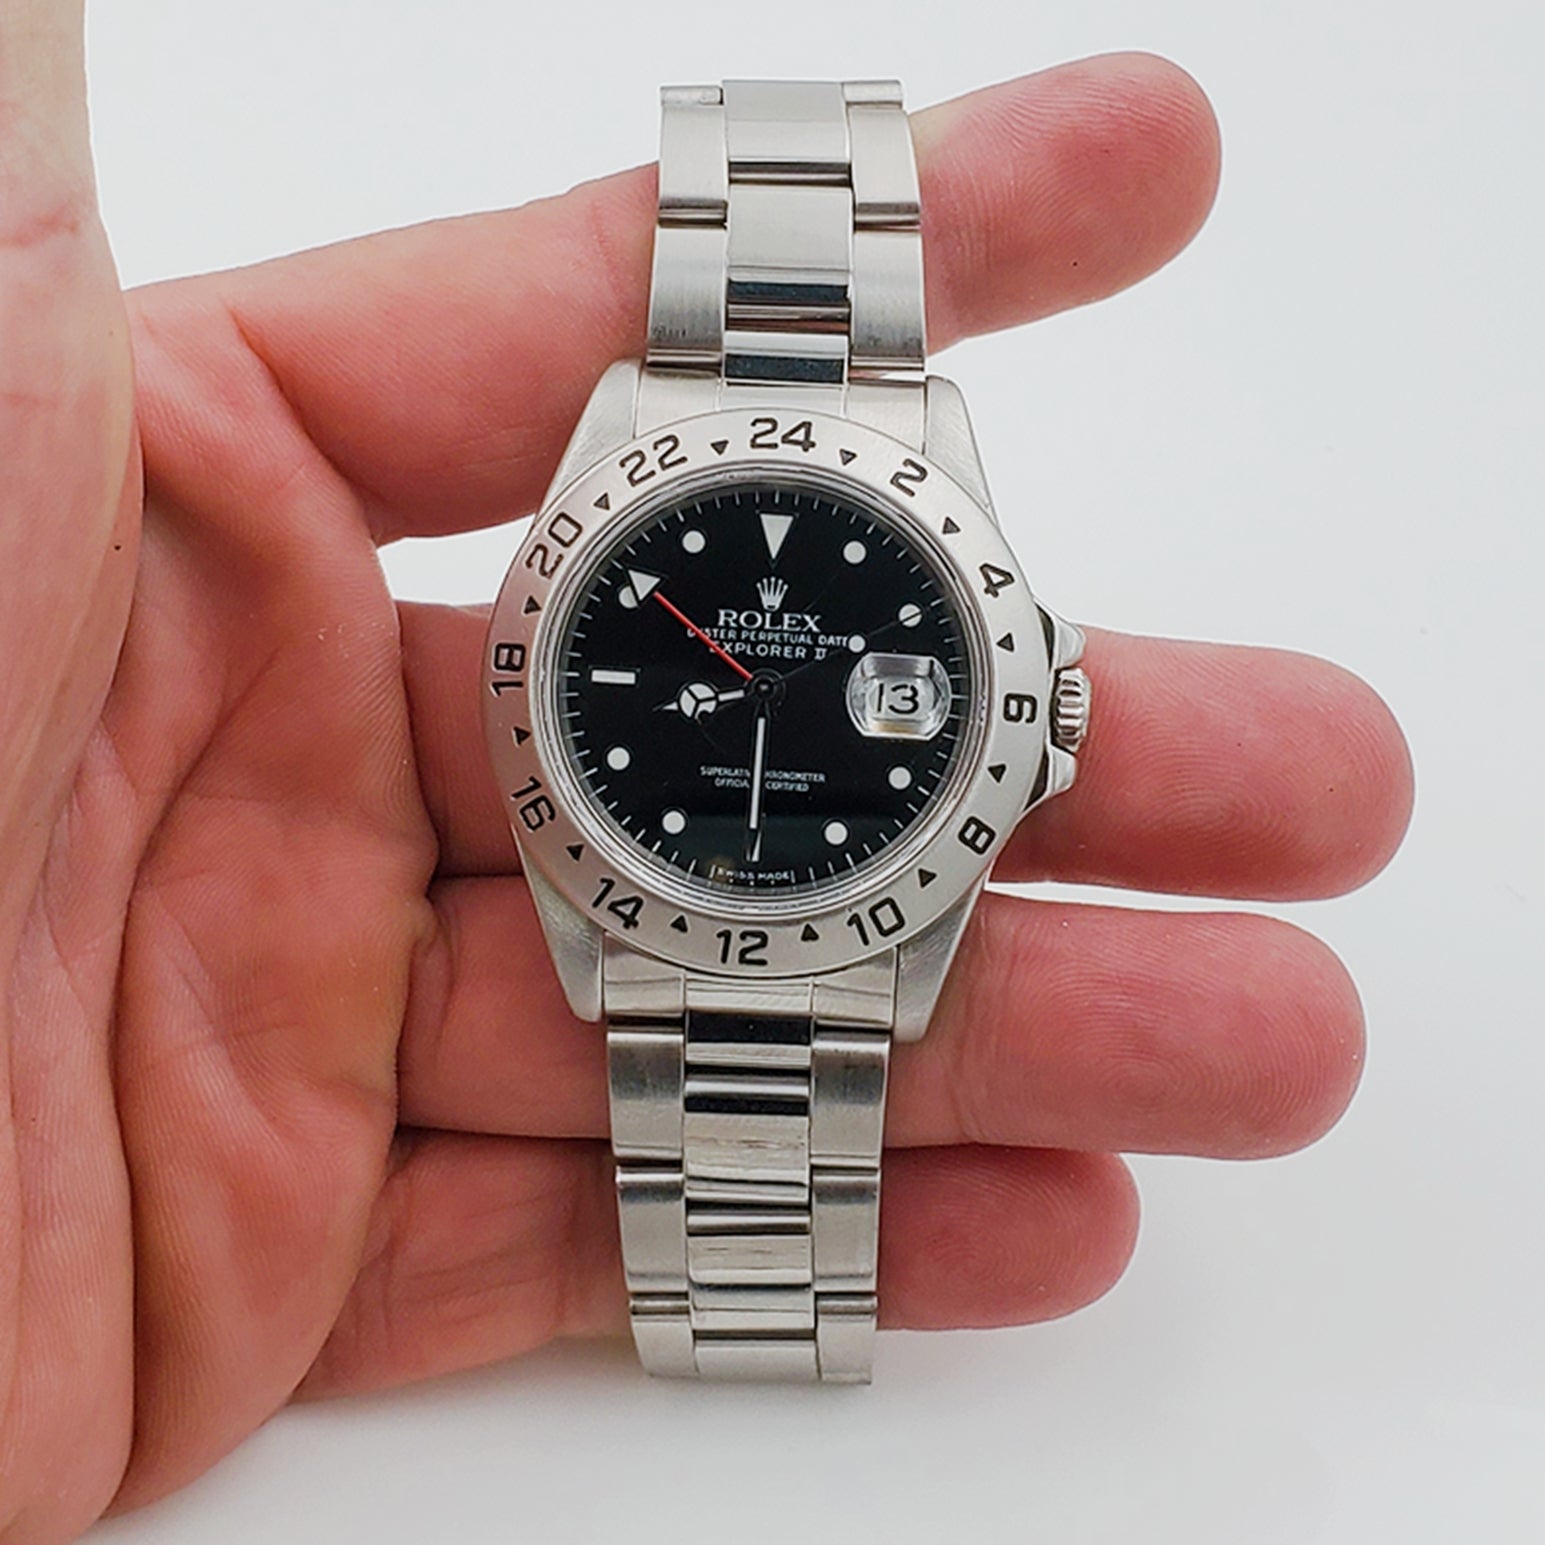 *Men's Rolex 40mm Explorer II Stainless Steel Watch with Oyster Band and Black Dial. (Pre-Owned)